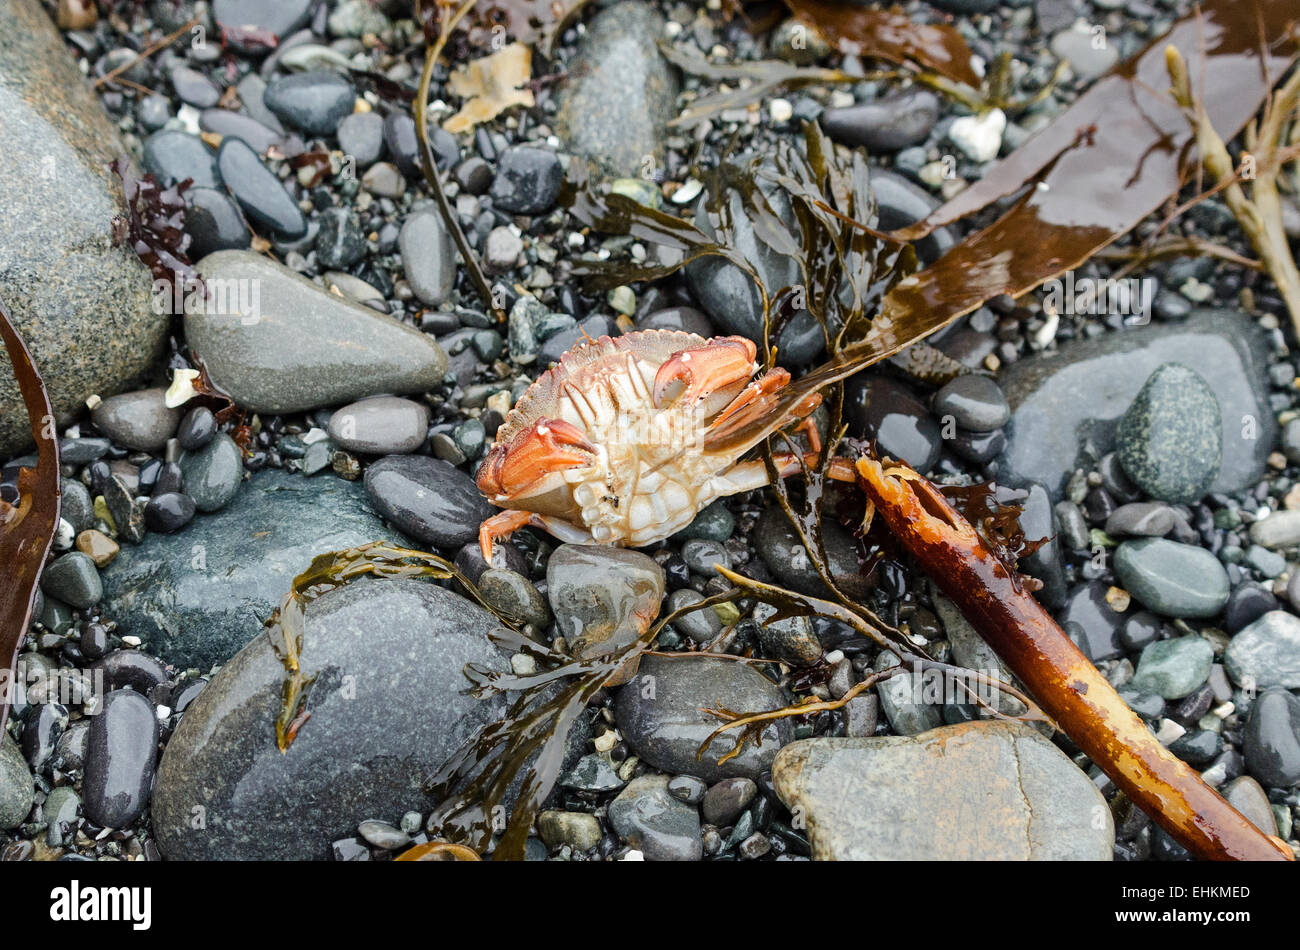 A Rock Crab struggles to right herself after a wave deposited her upside down on the beach, Acadia National Park, Maine. Stock Photo